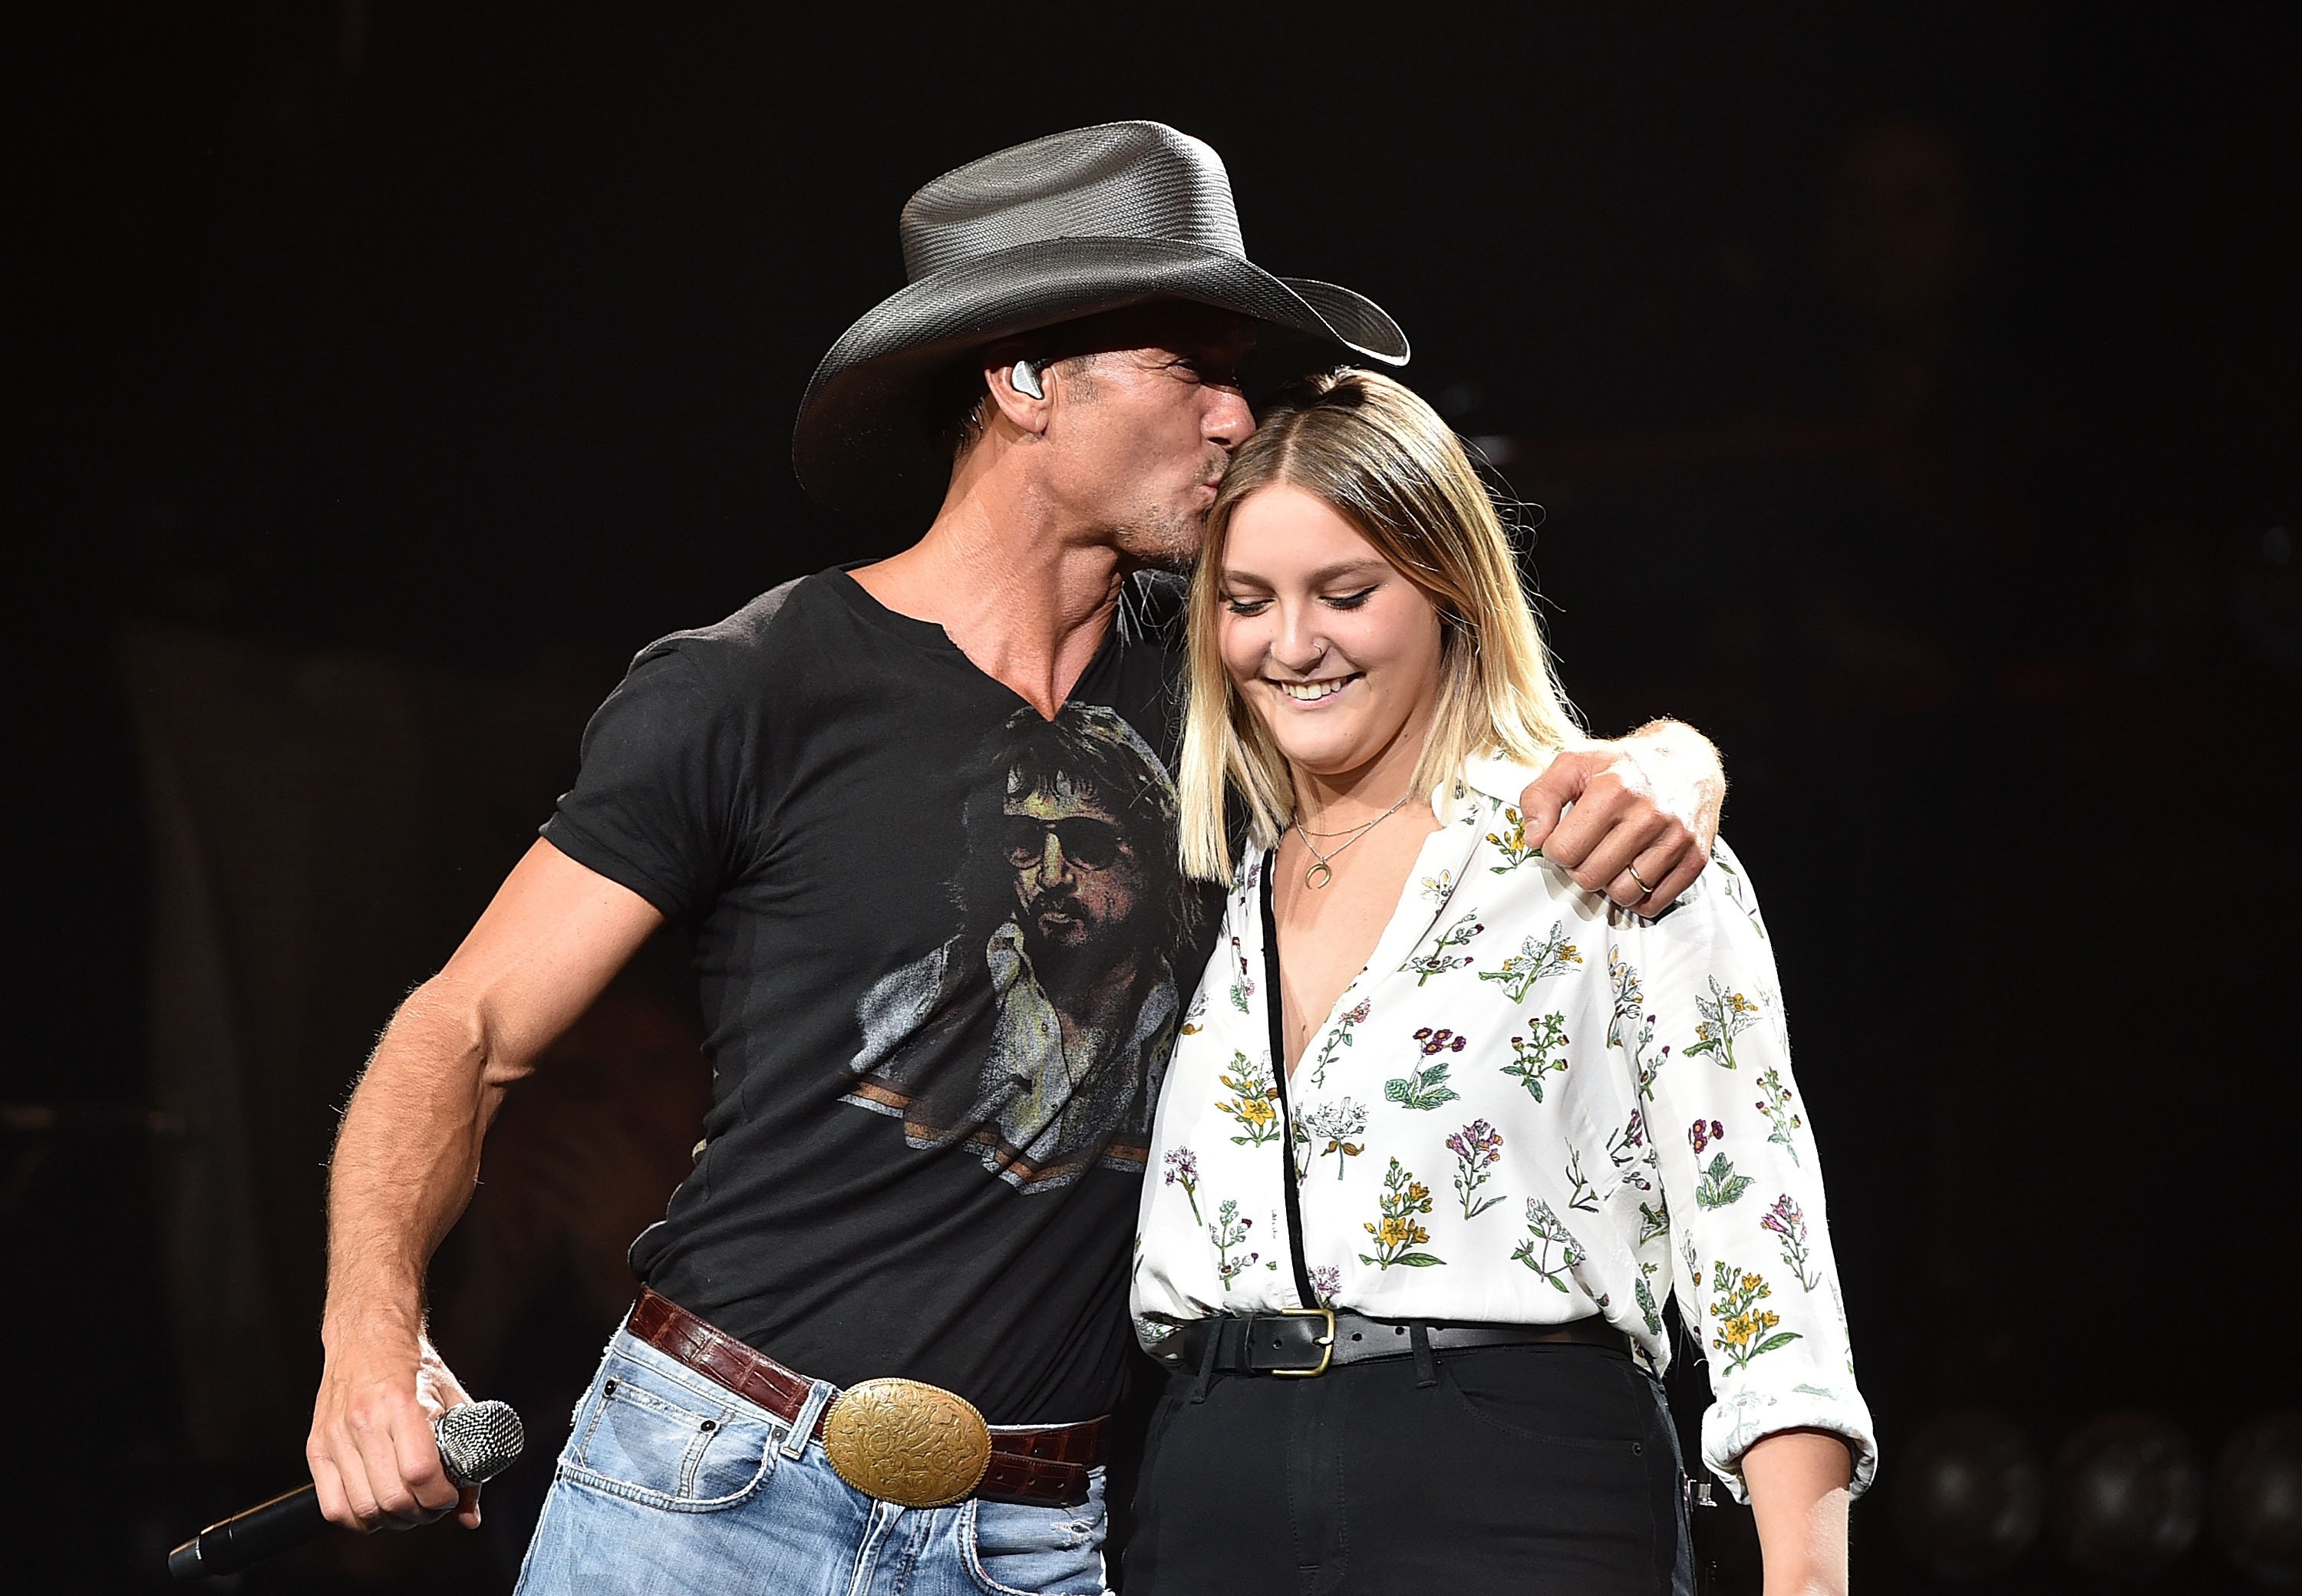 Tim McGraw performing with his daughter Gracie in Nashville 2015. | Source: Getty Images